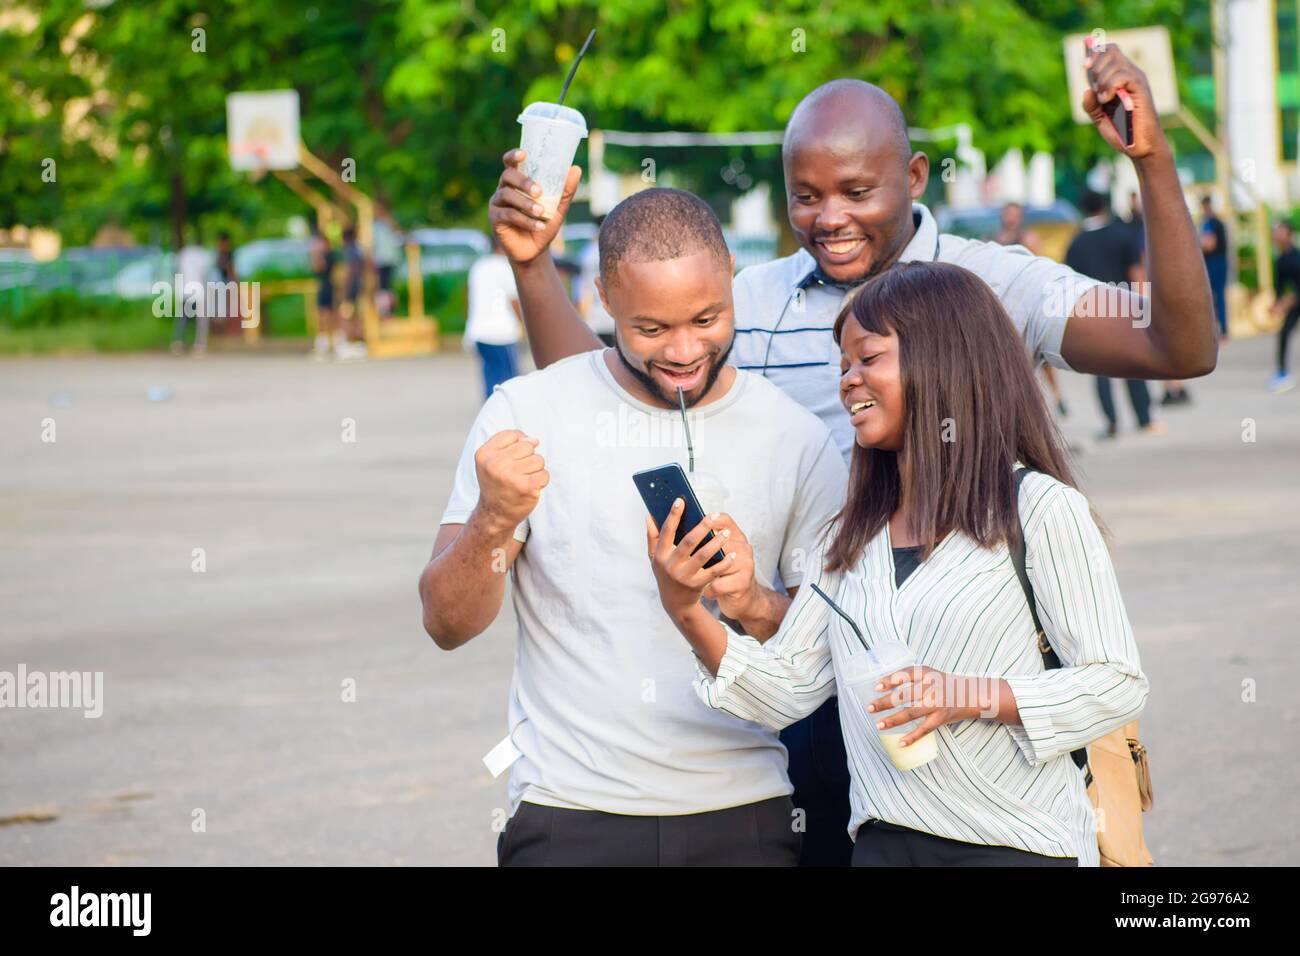 happy group of African friends consisting of two guys and a lady joyfully looking at a smart phone in an outdoor park while jubilating Stock Photo